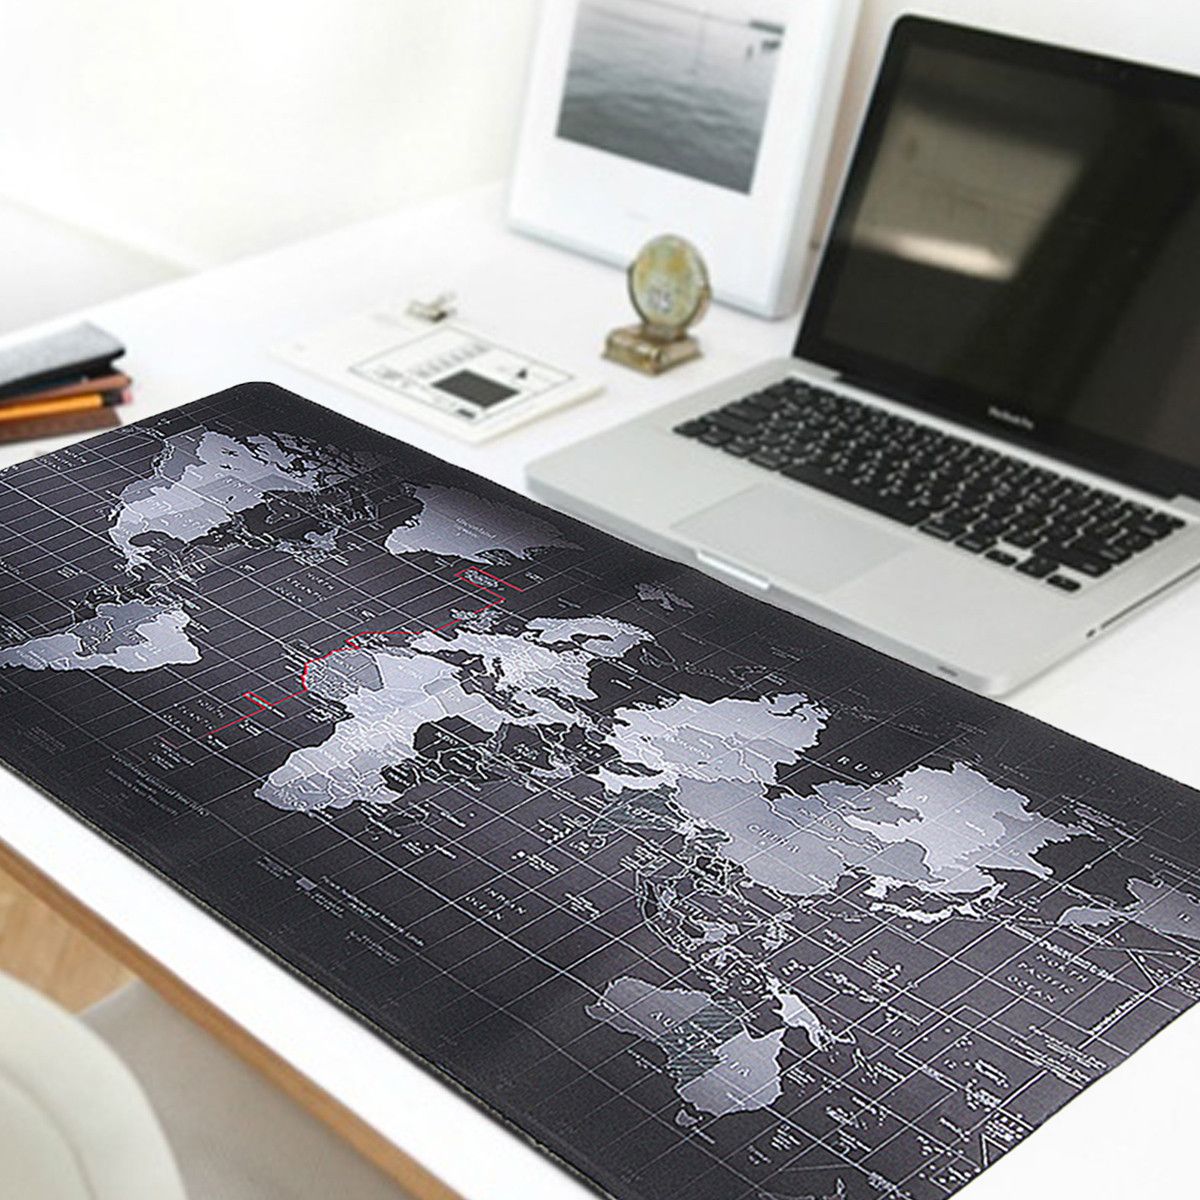 800x300x2mm-Large-Size-World-Map-Mouse-Pad-For-Laptop-Computer-1118978